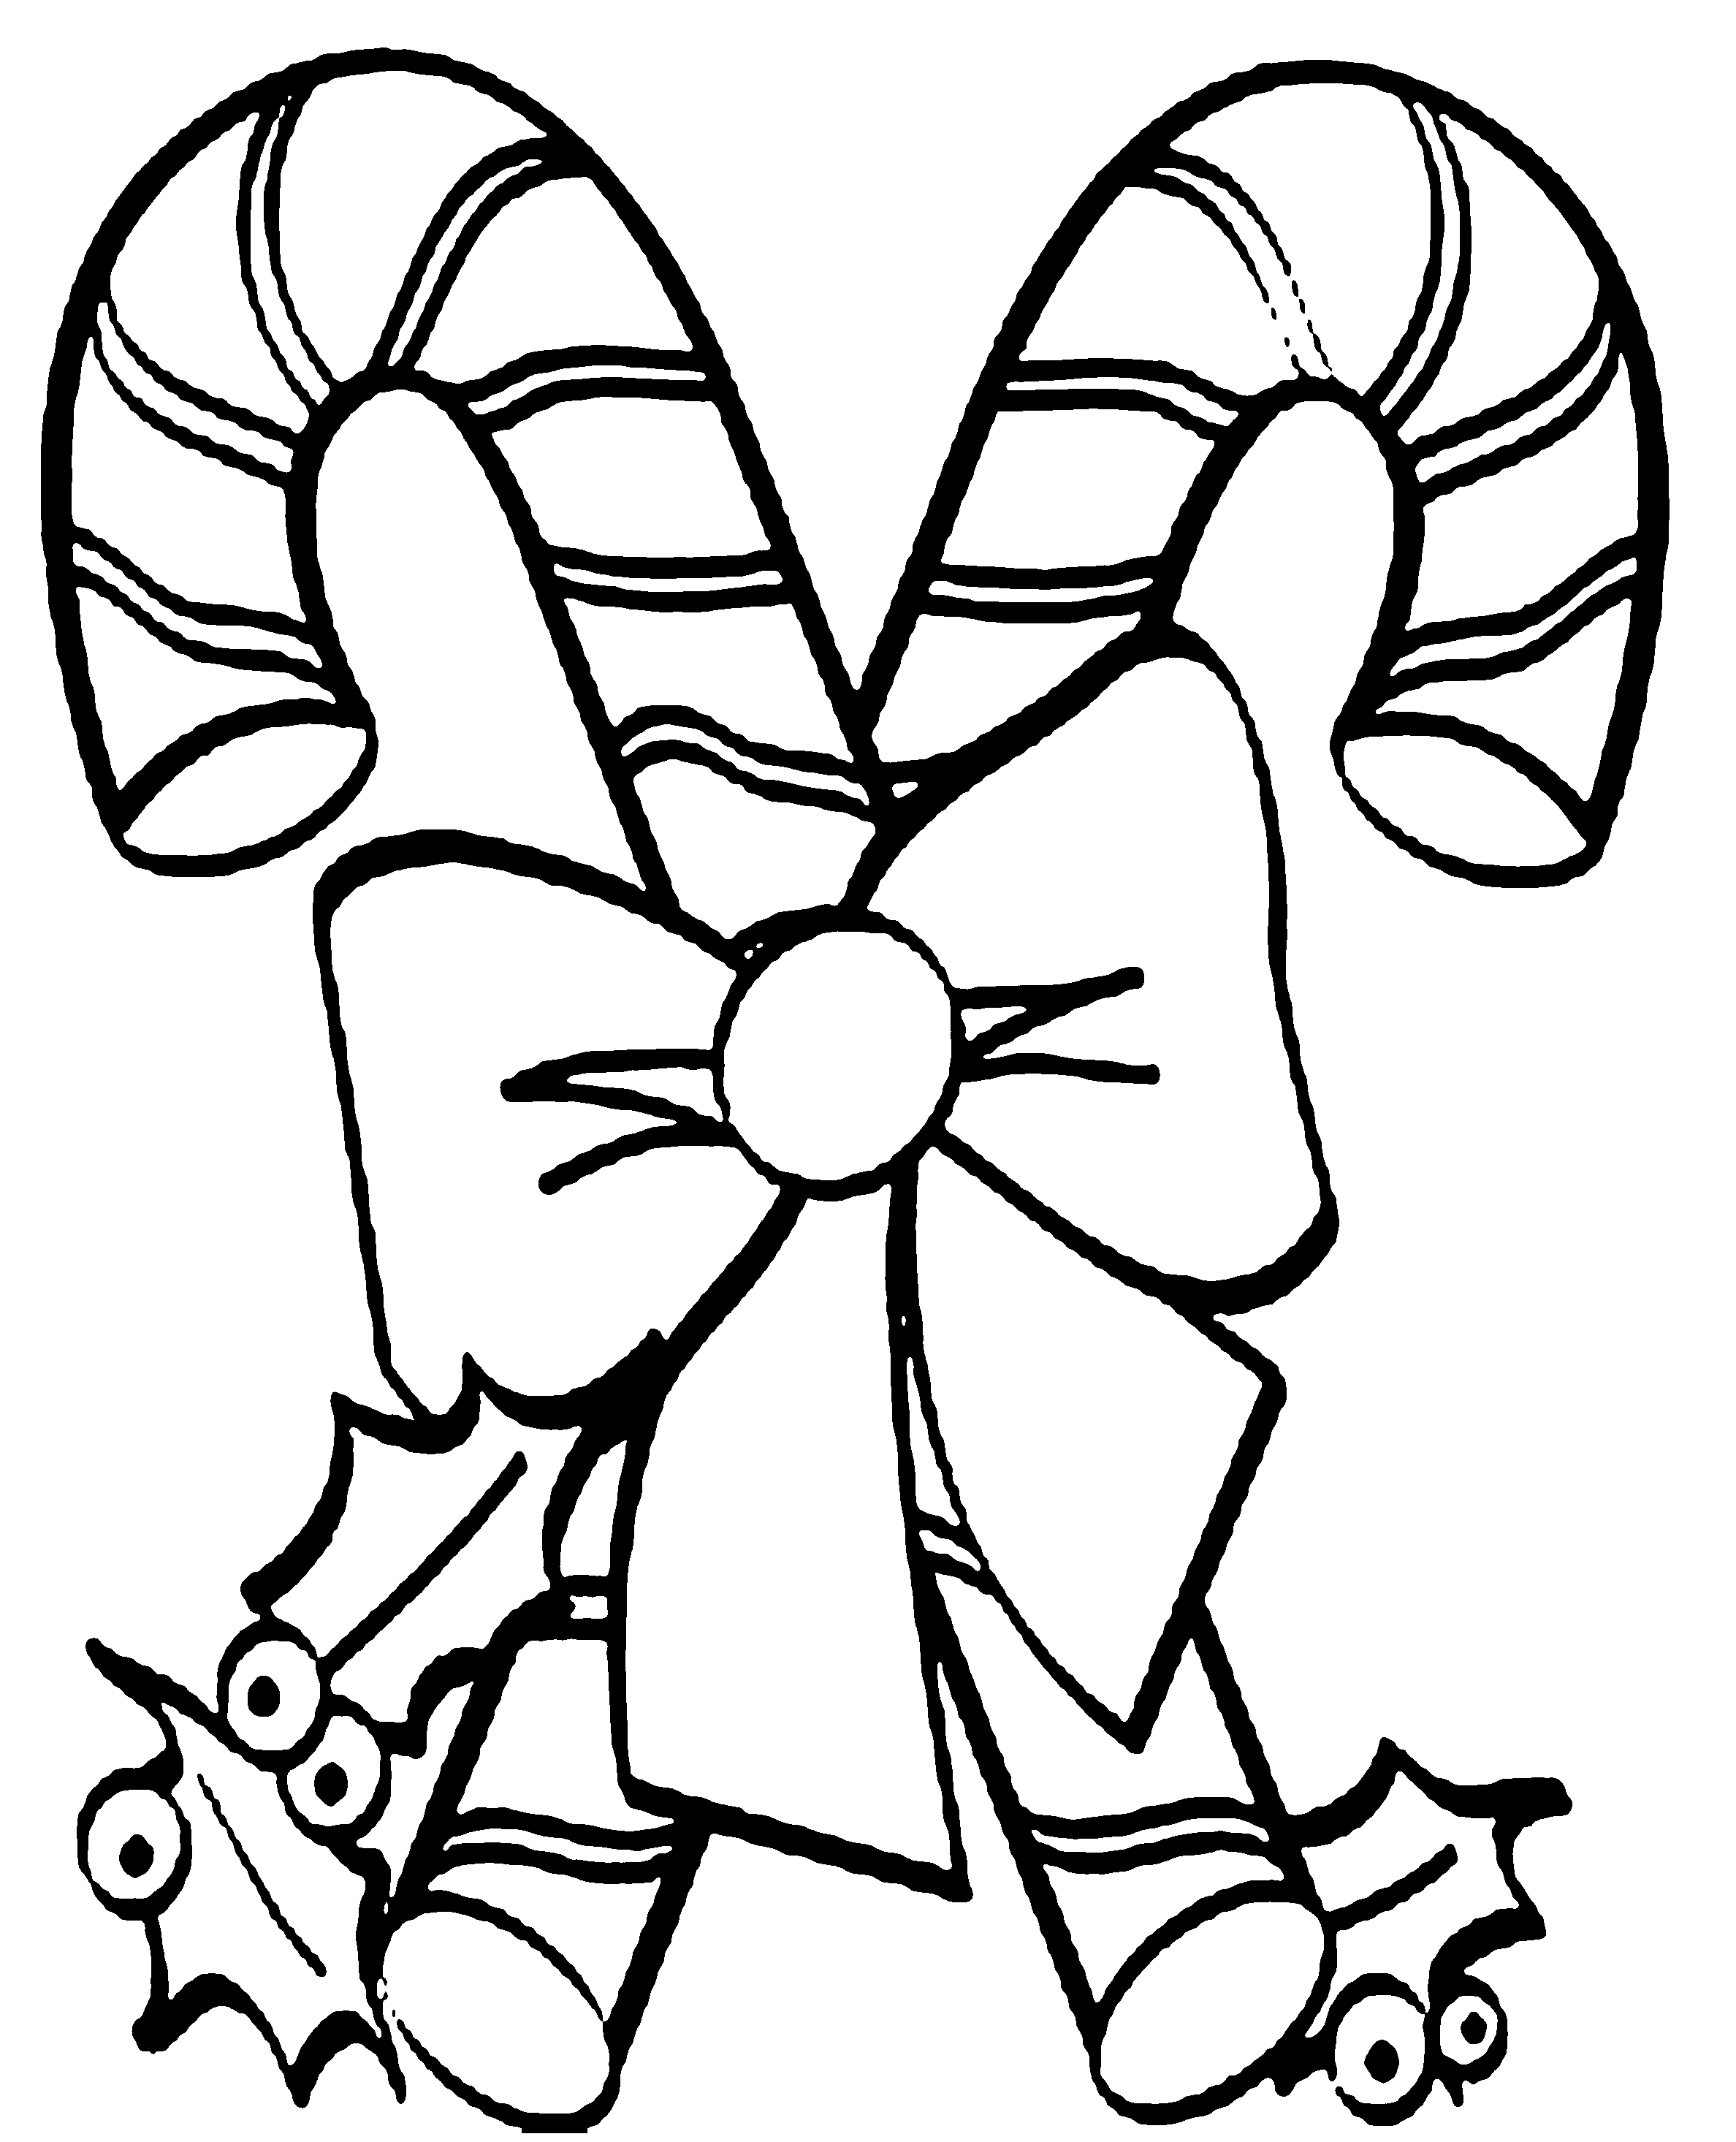 Candy Cane Character Coloring Page - Coloring Pages For All Ages